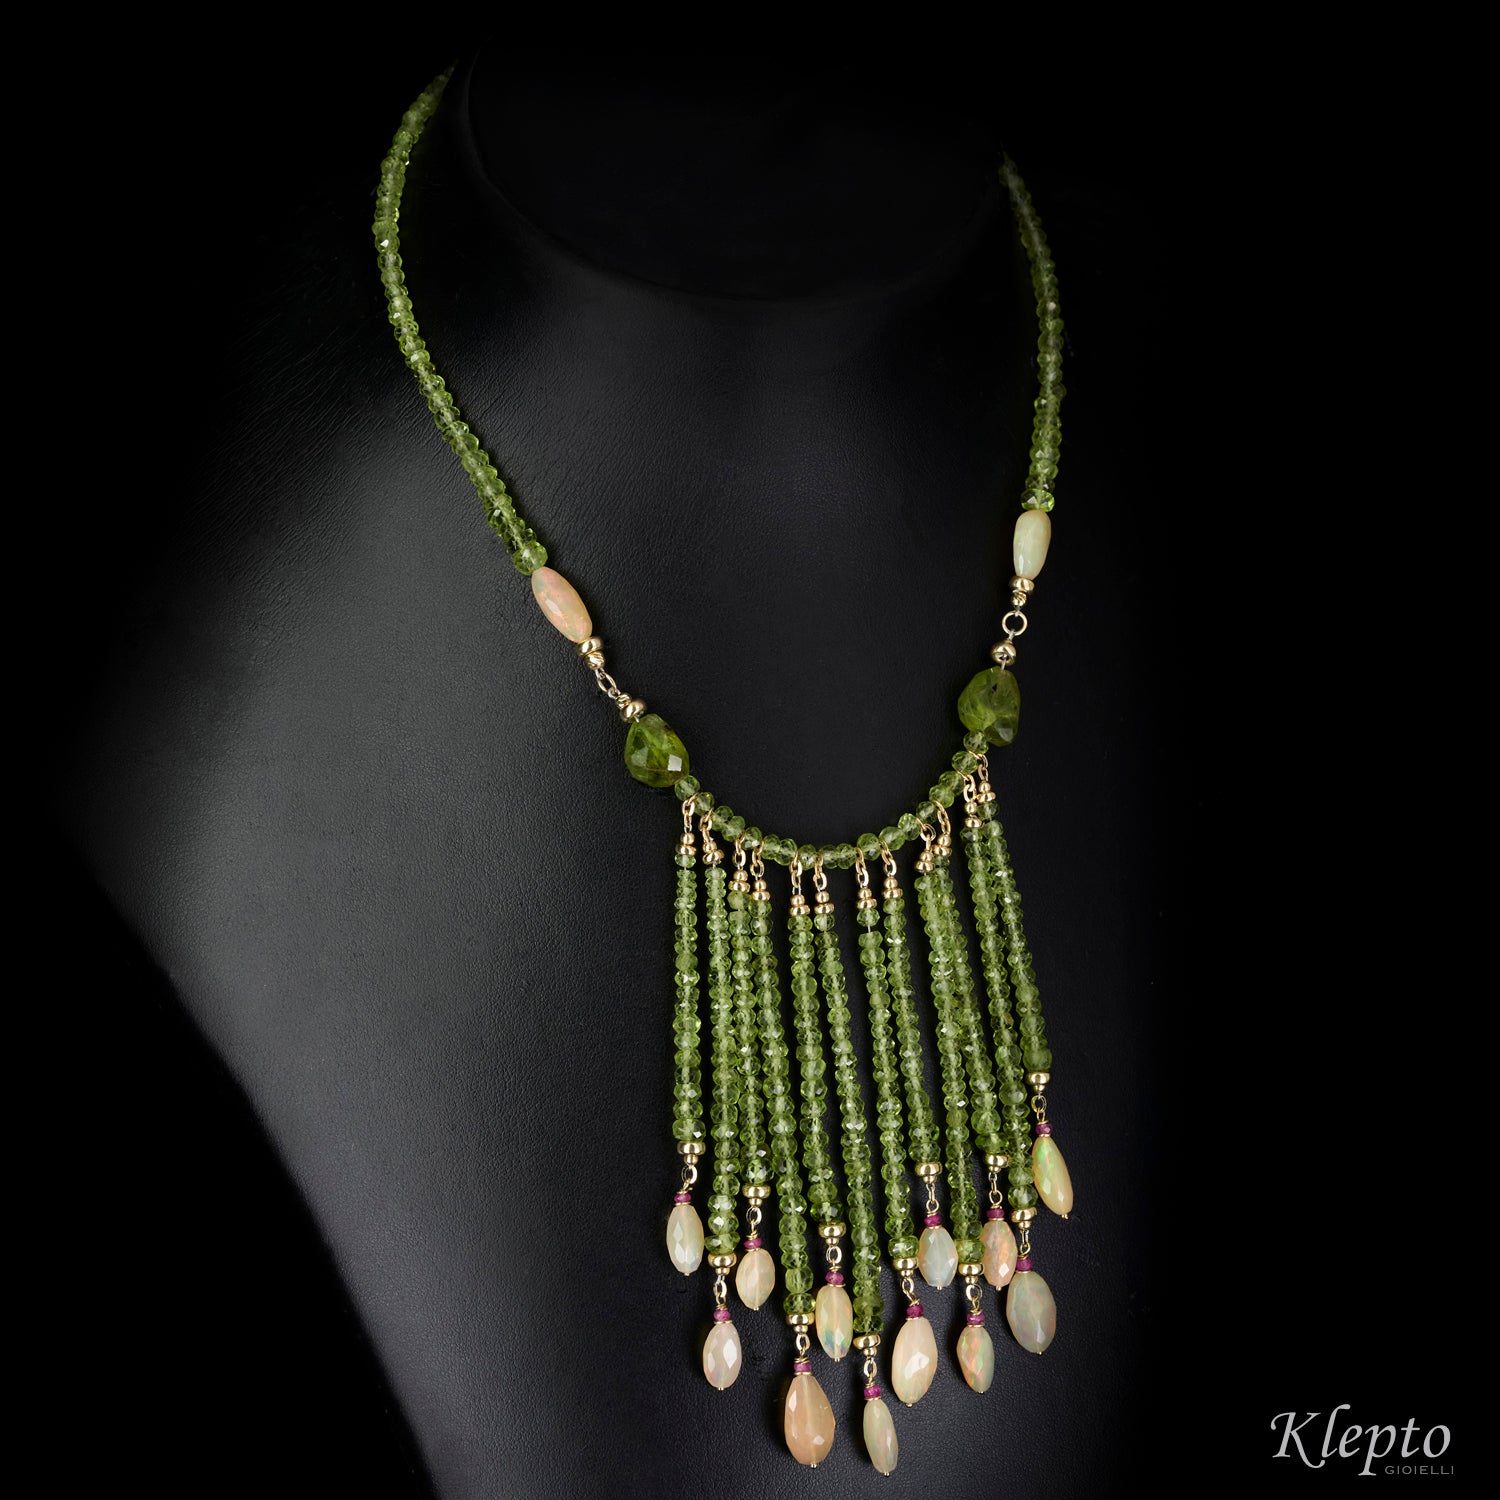 Choker necklace with cascade of Peridot, Opals and Rubies